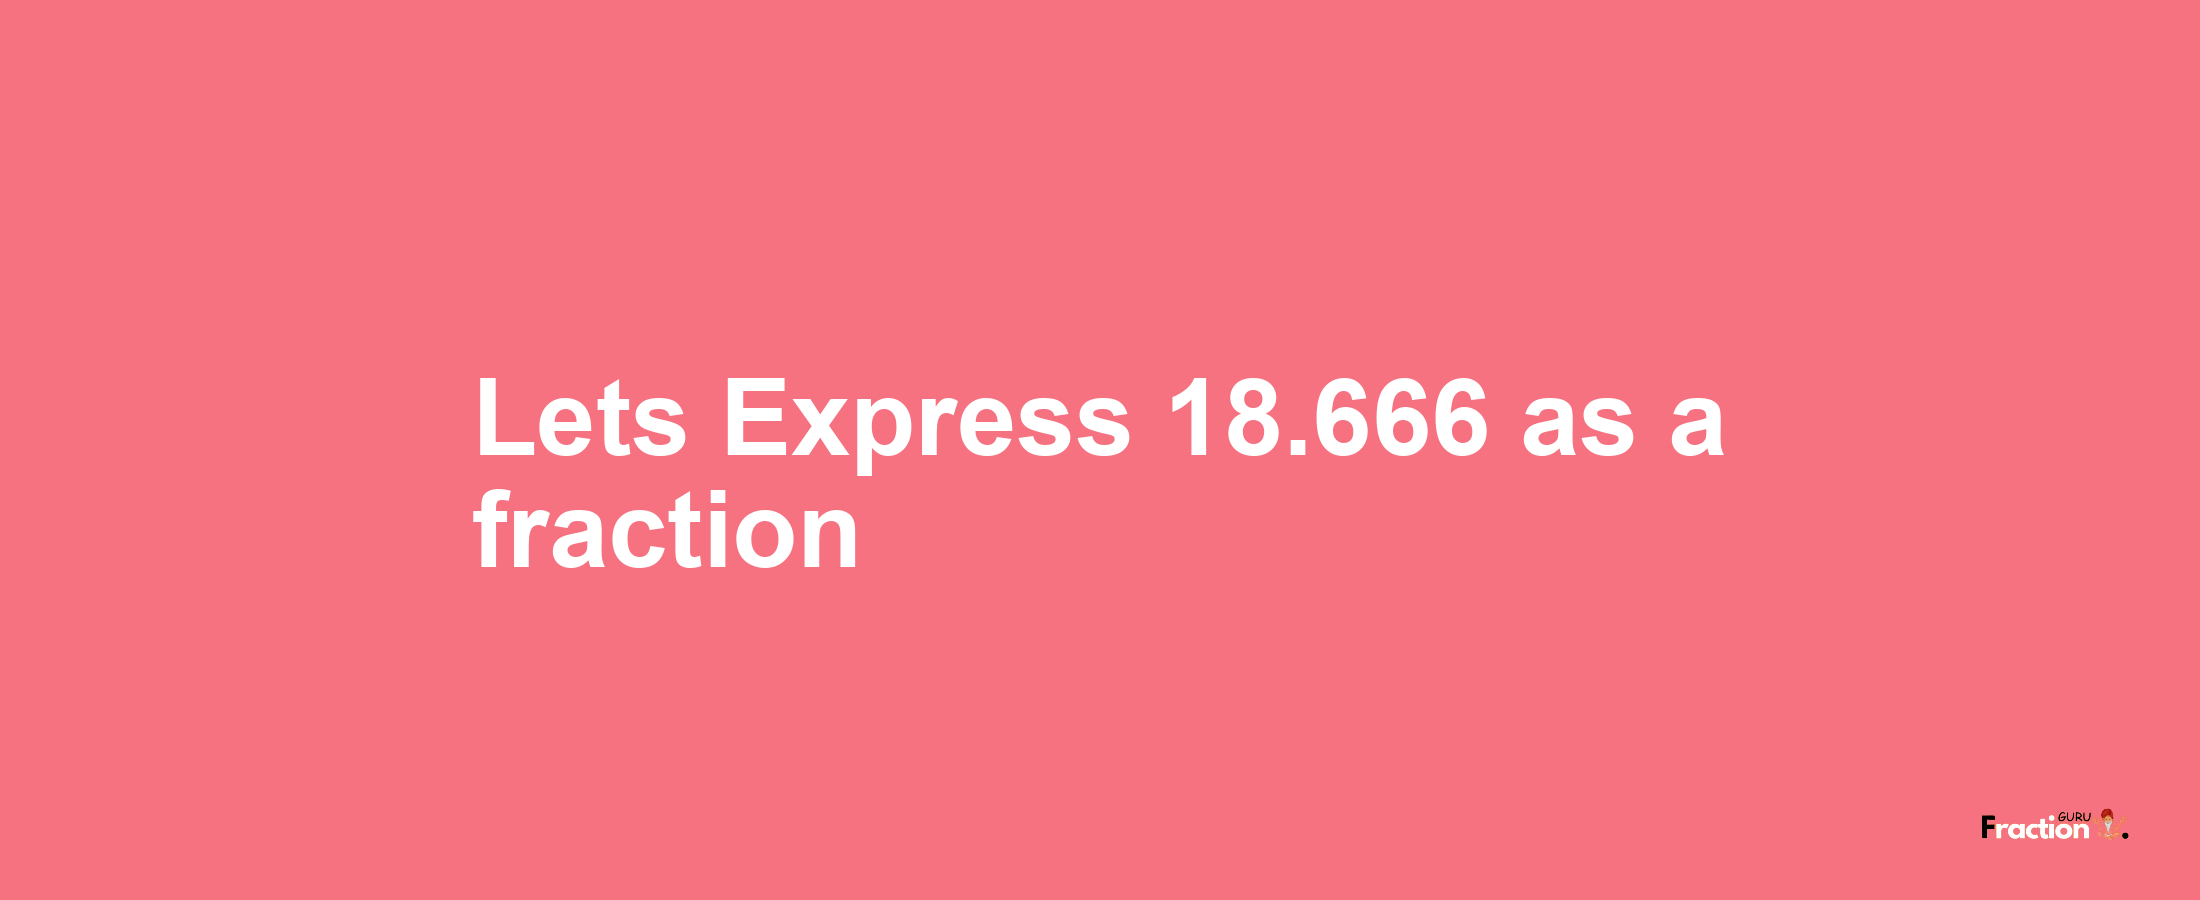 Lets Express 18.666 as afraction